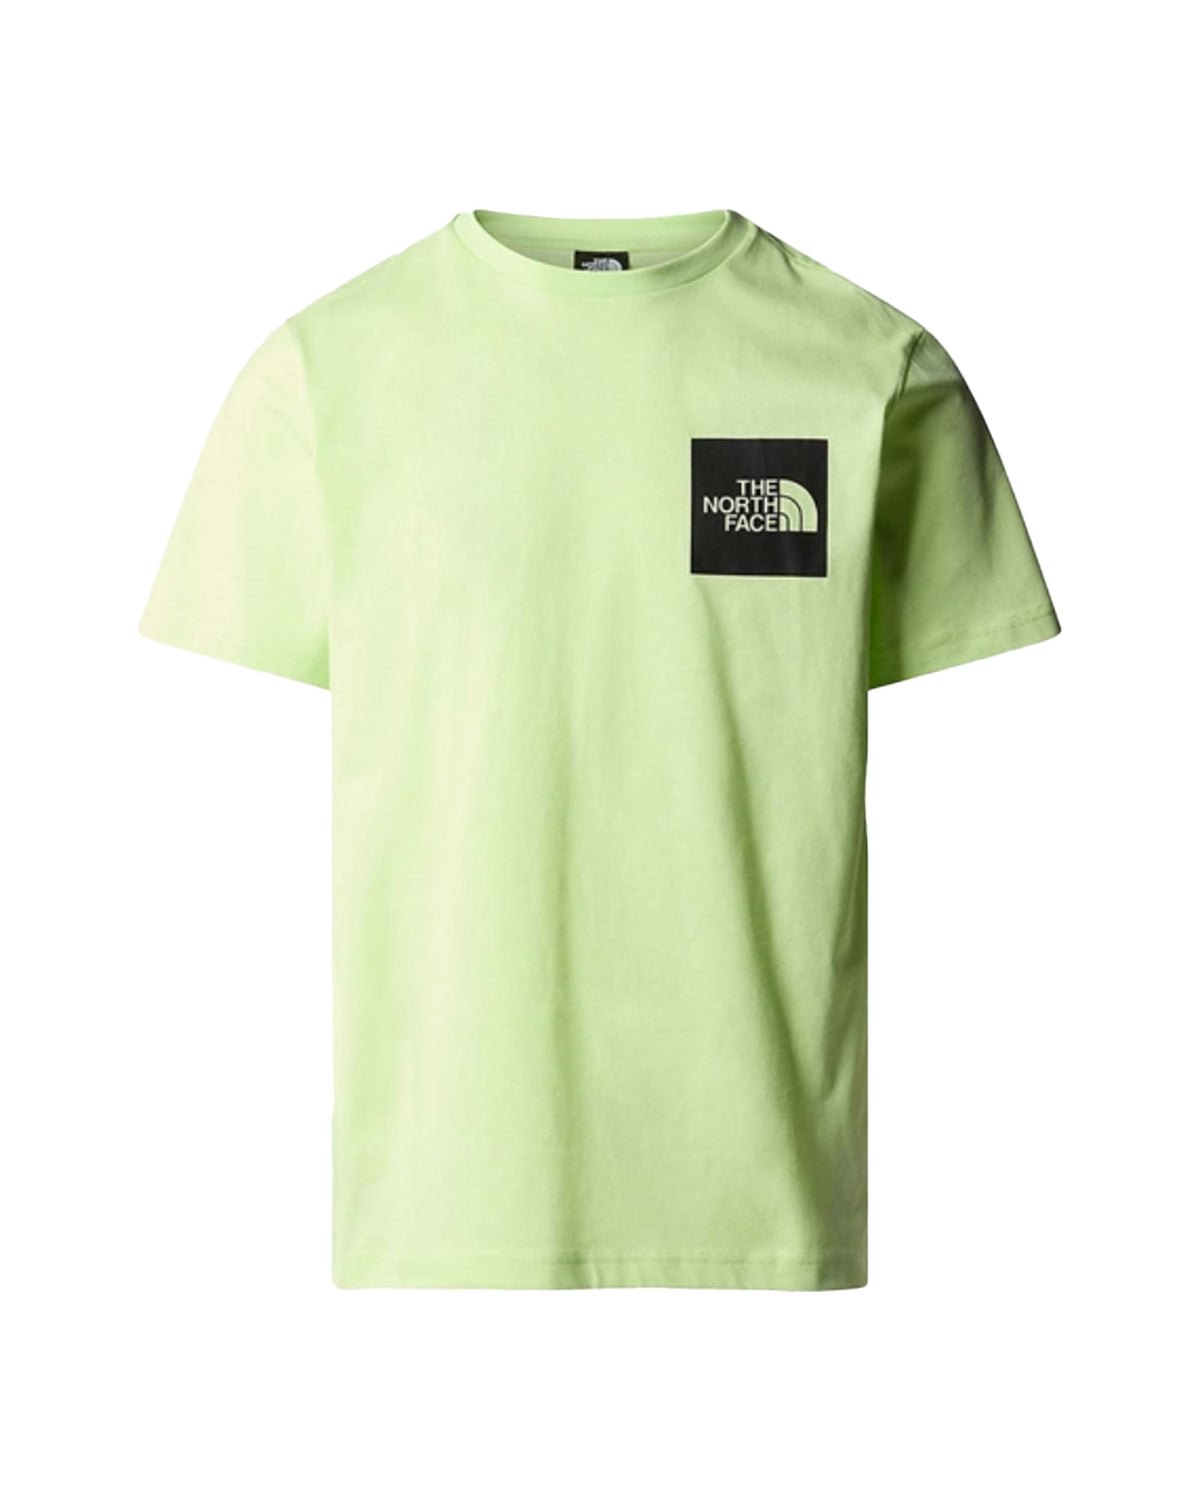 Man Tee The North Face Fine Green